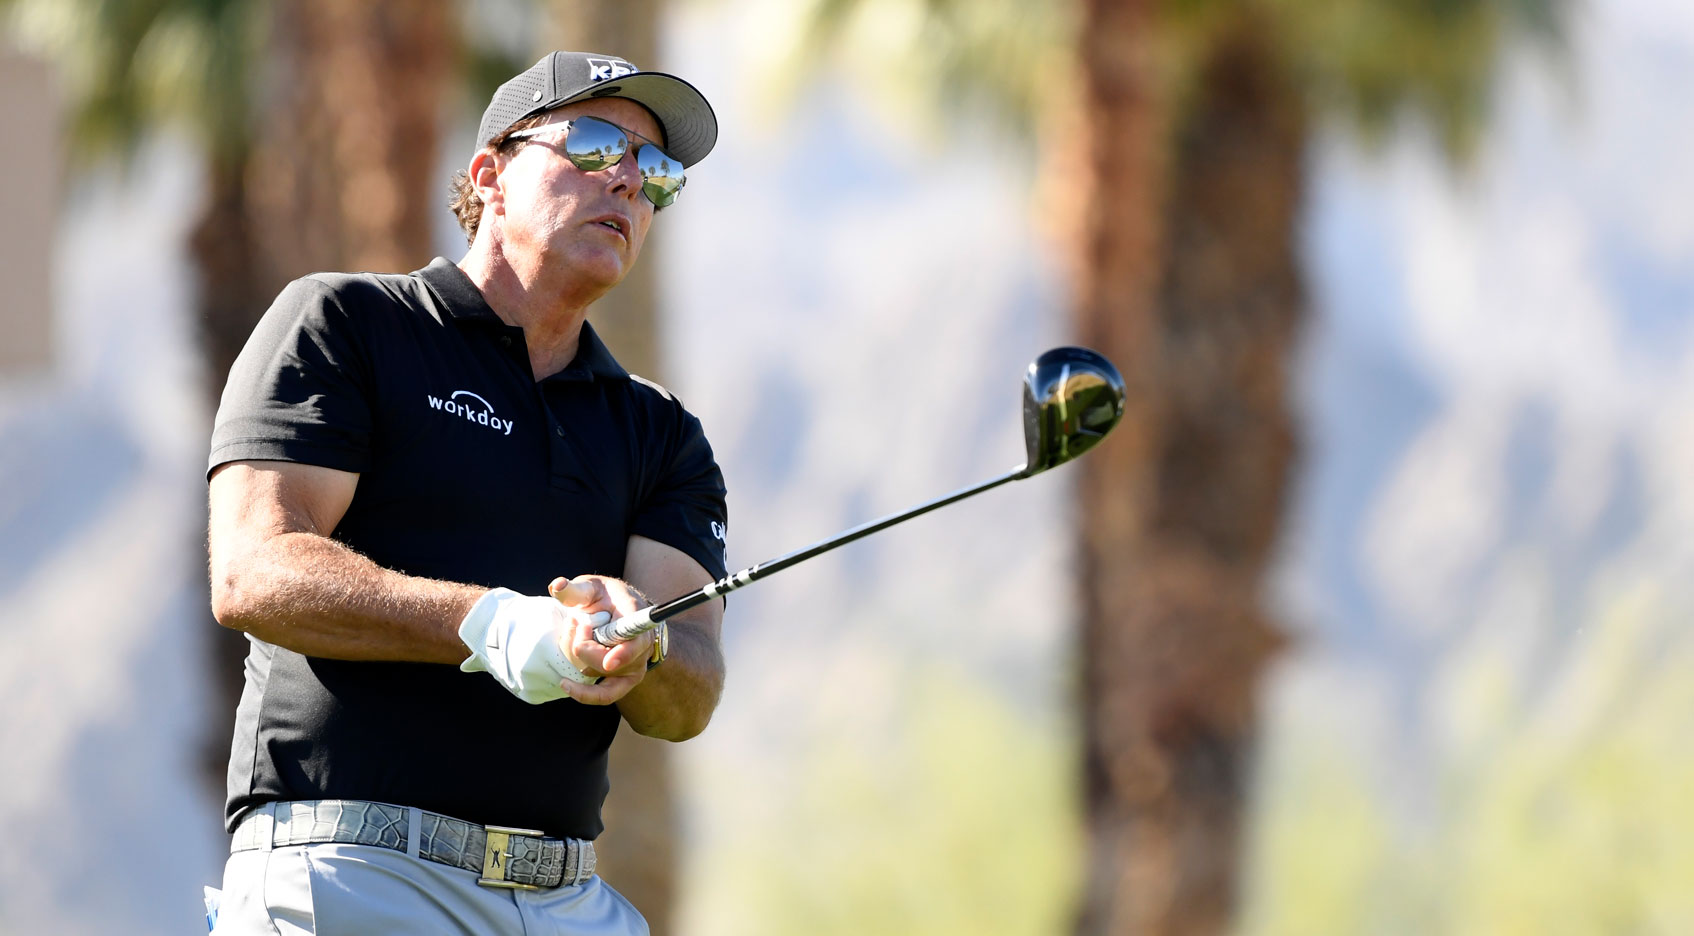 Phil Mickelson cards 18 pars in a round for first time on TOUR